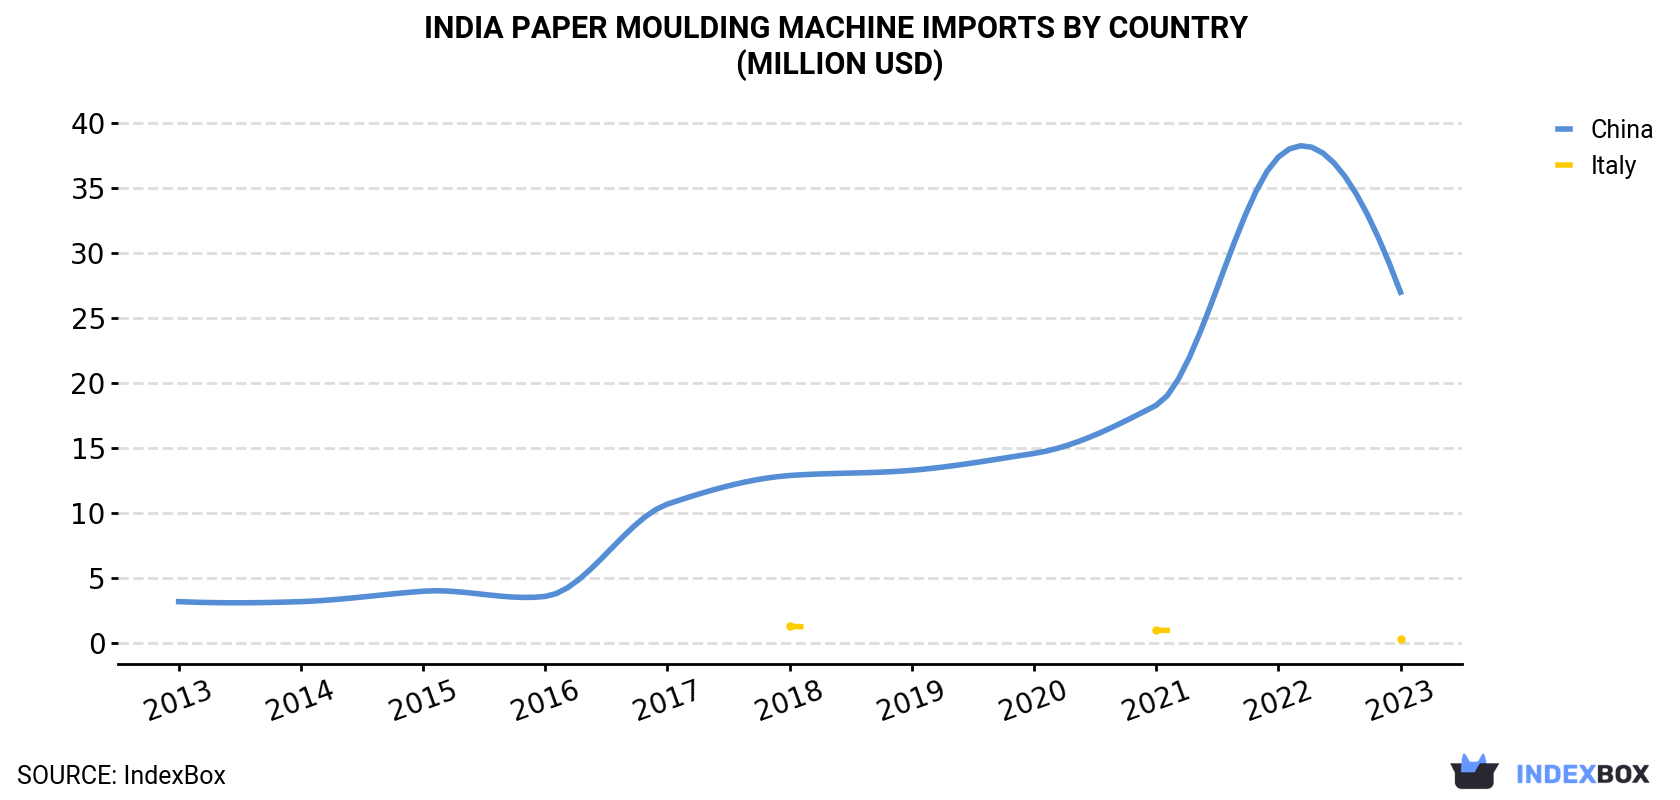 India Paper Moulding Machine Imports By Country (Million USD)